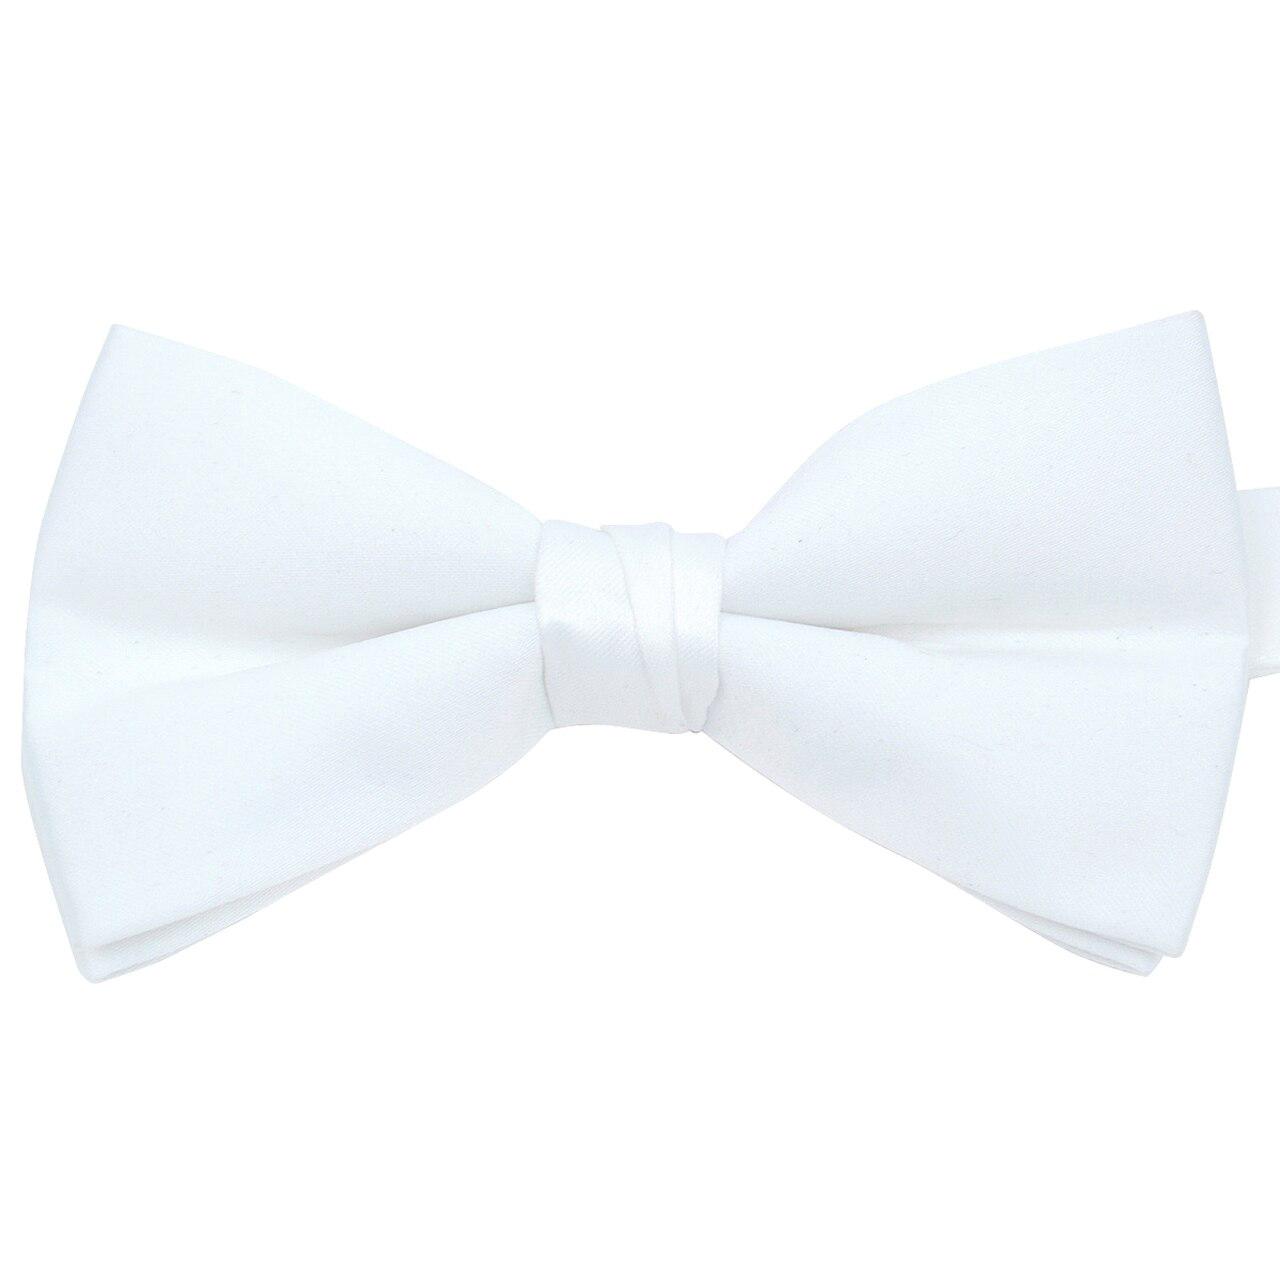  Solid Bow Tie Boxed - White